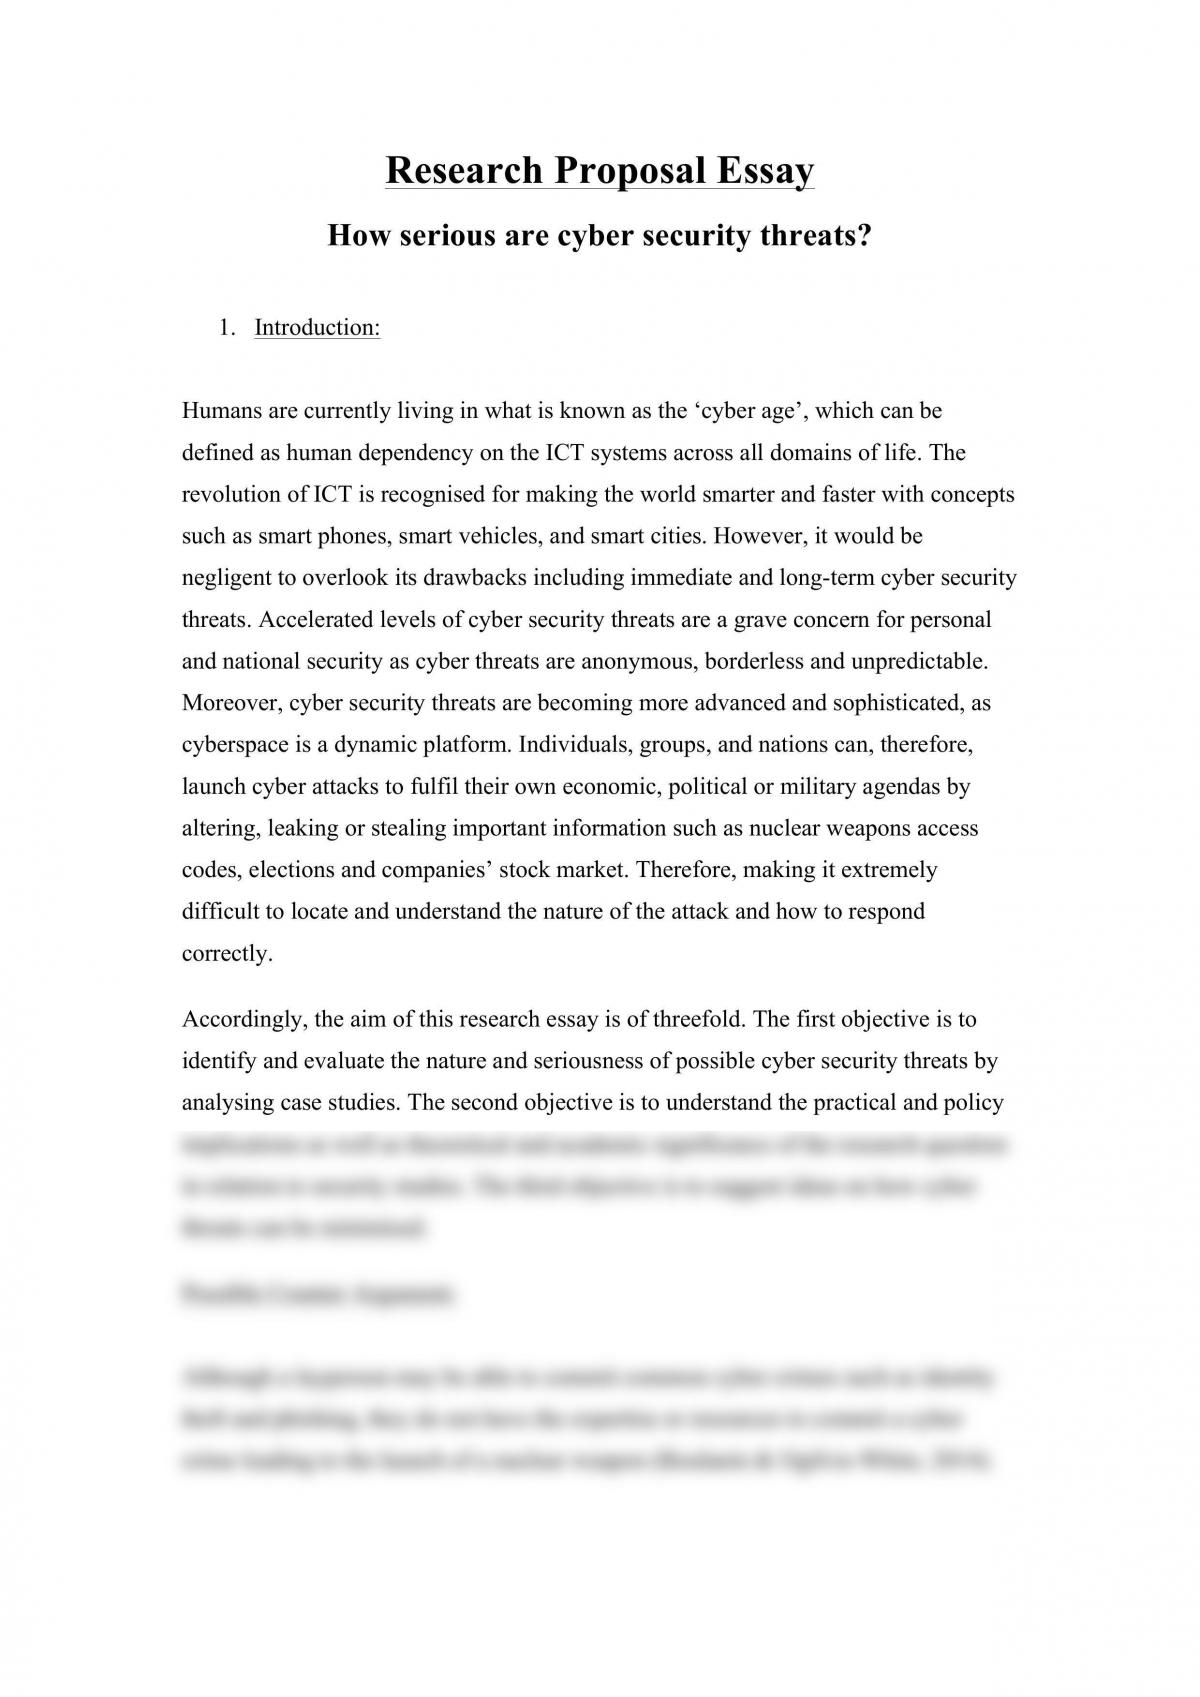 How serious are cyber security threats? Research proposal essay - Page 1